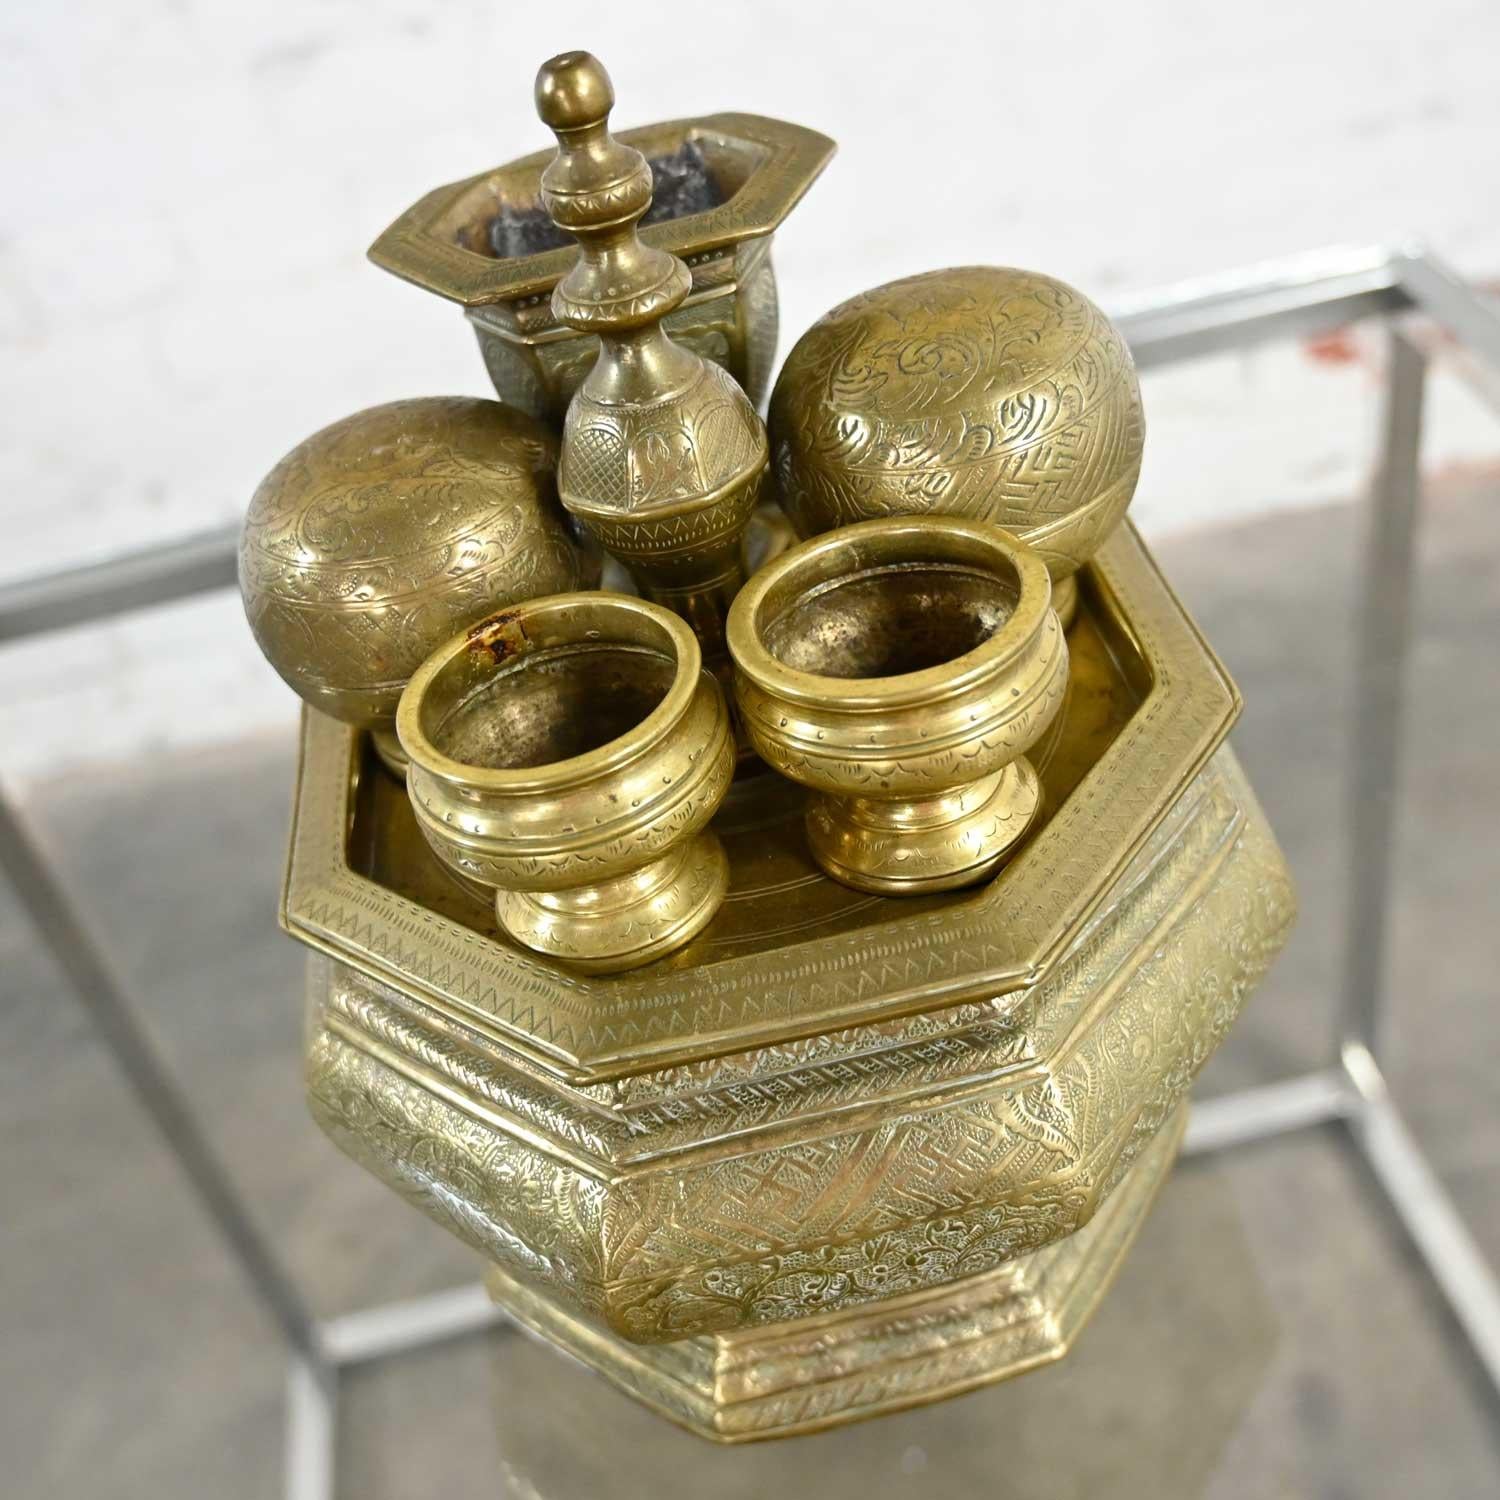 Phenomenal vintage East Java Indonesian brass Tepak Sireh betel nut set including a large brass bowl with removeable lid which doubles as a tray, two rounded containers with lids, two smaller vessels without lids, and a narrow vessel, all with